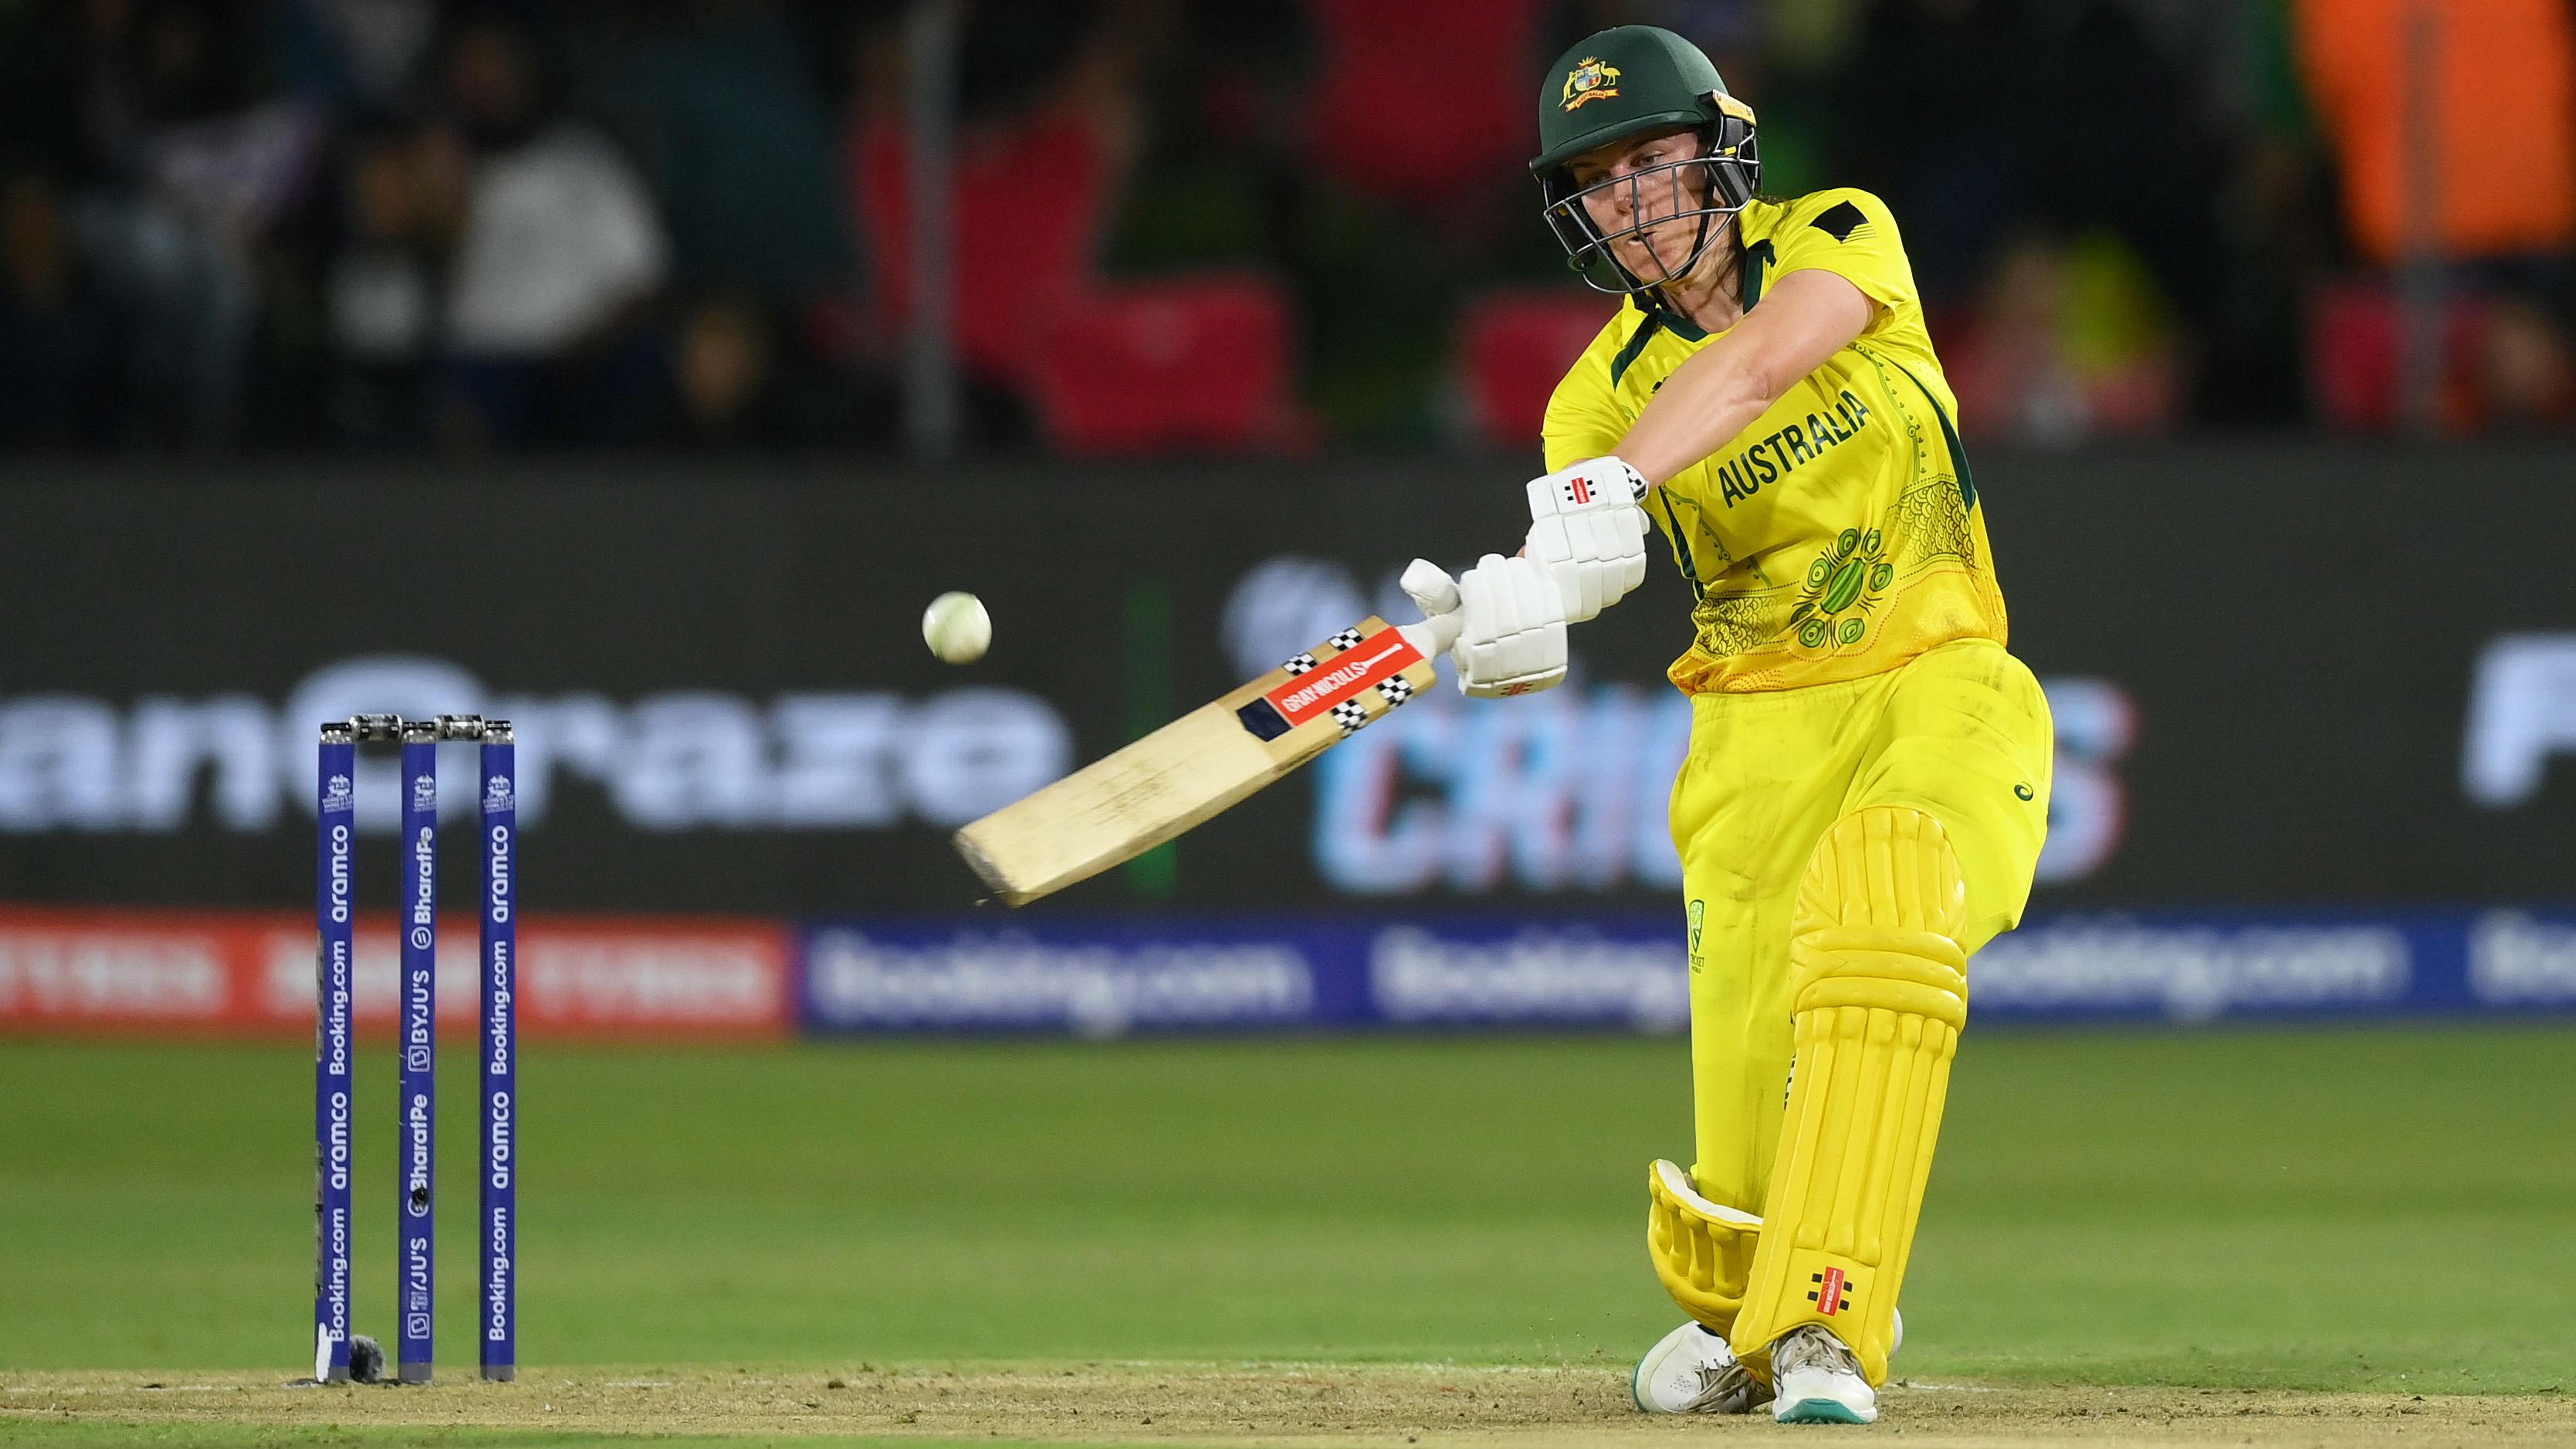 Star's 'second coming' powers Australia 'machine' into World Cup semi-finals